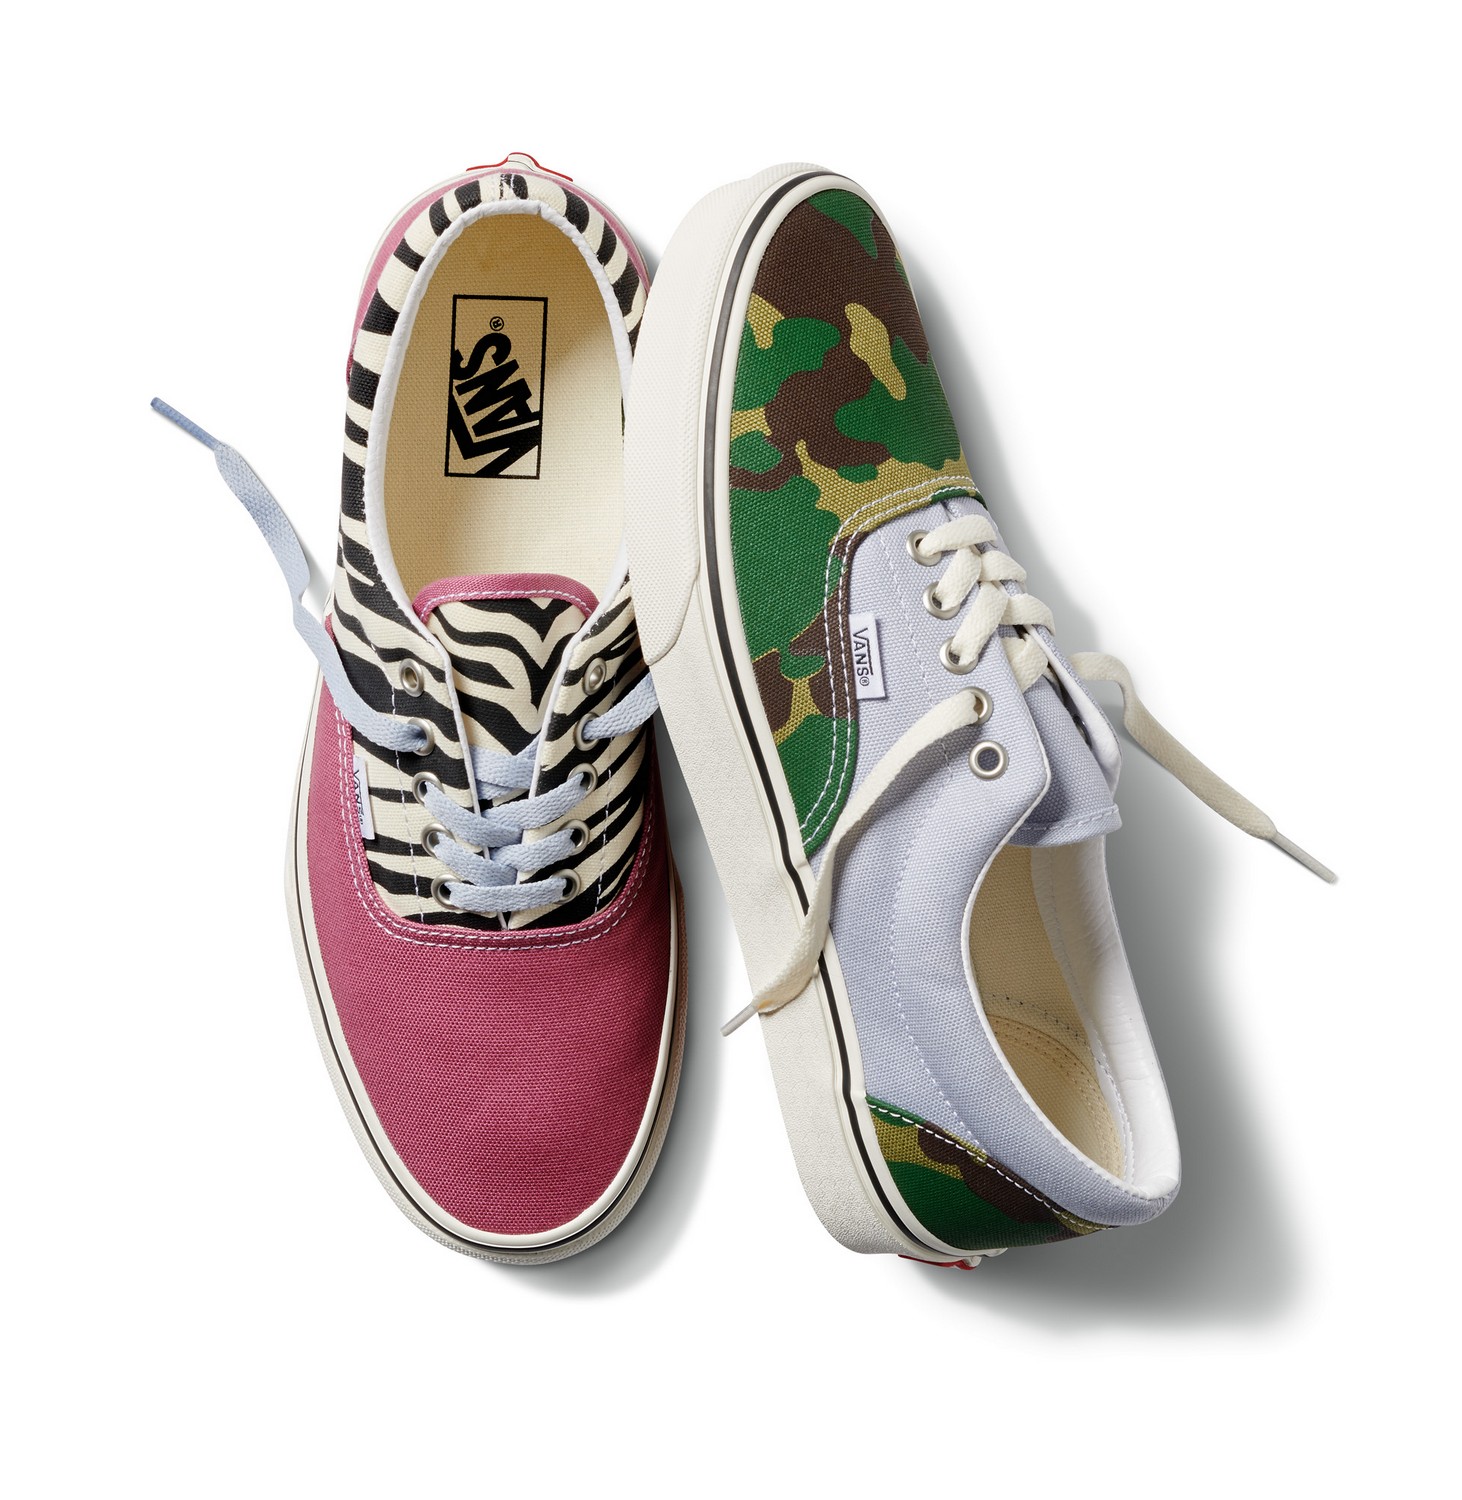 Vans Honors Its Early-Era Skateboard Roots With 'Mismatch Era' Capsule ...